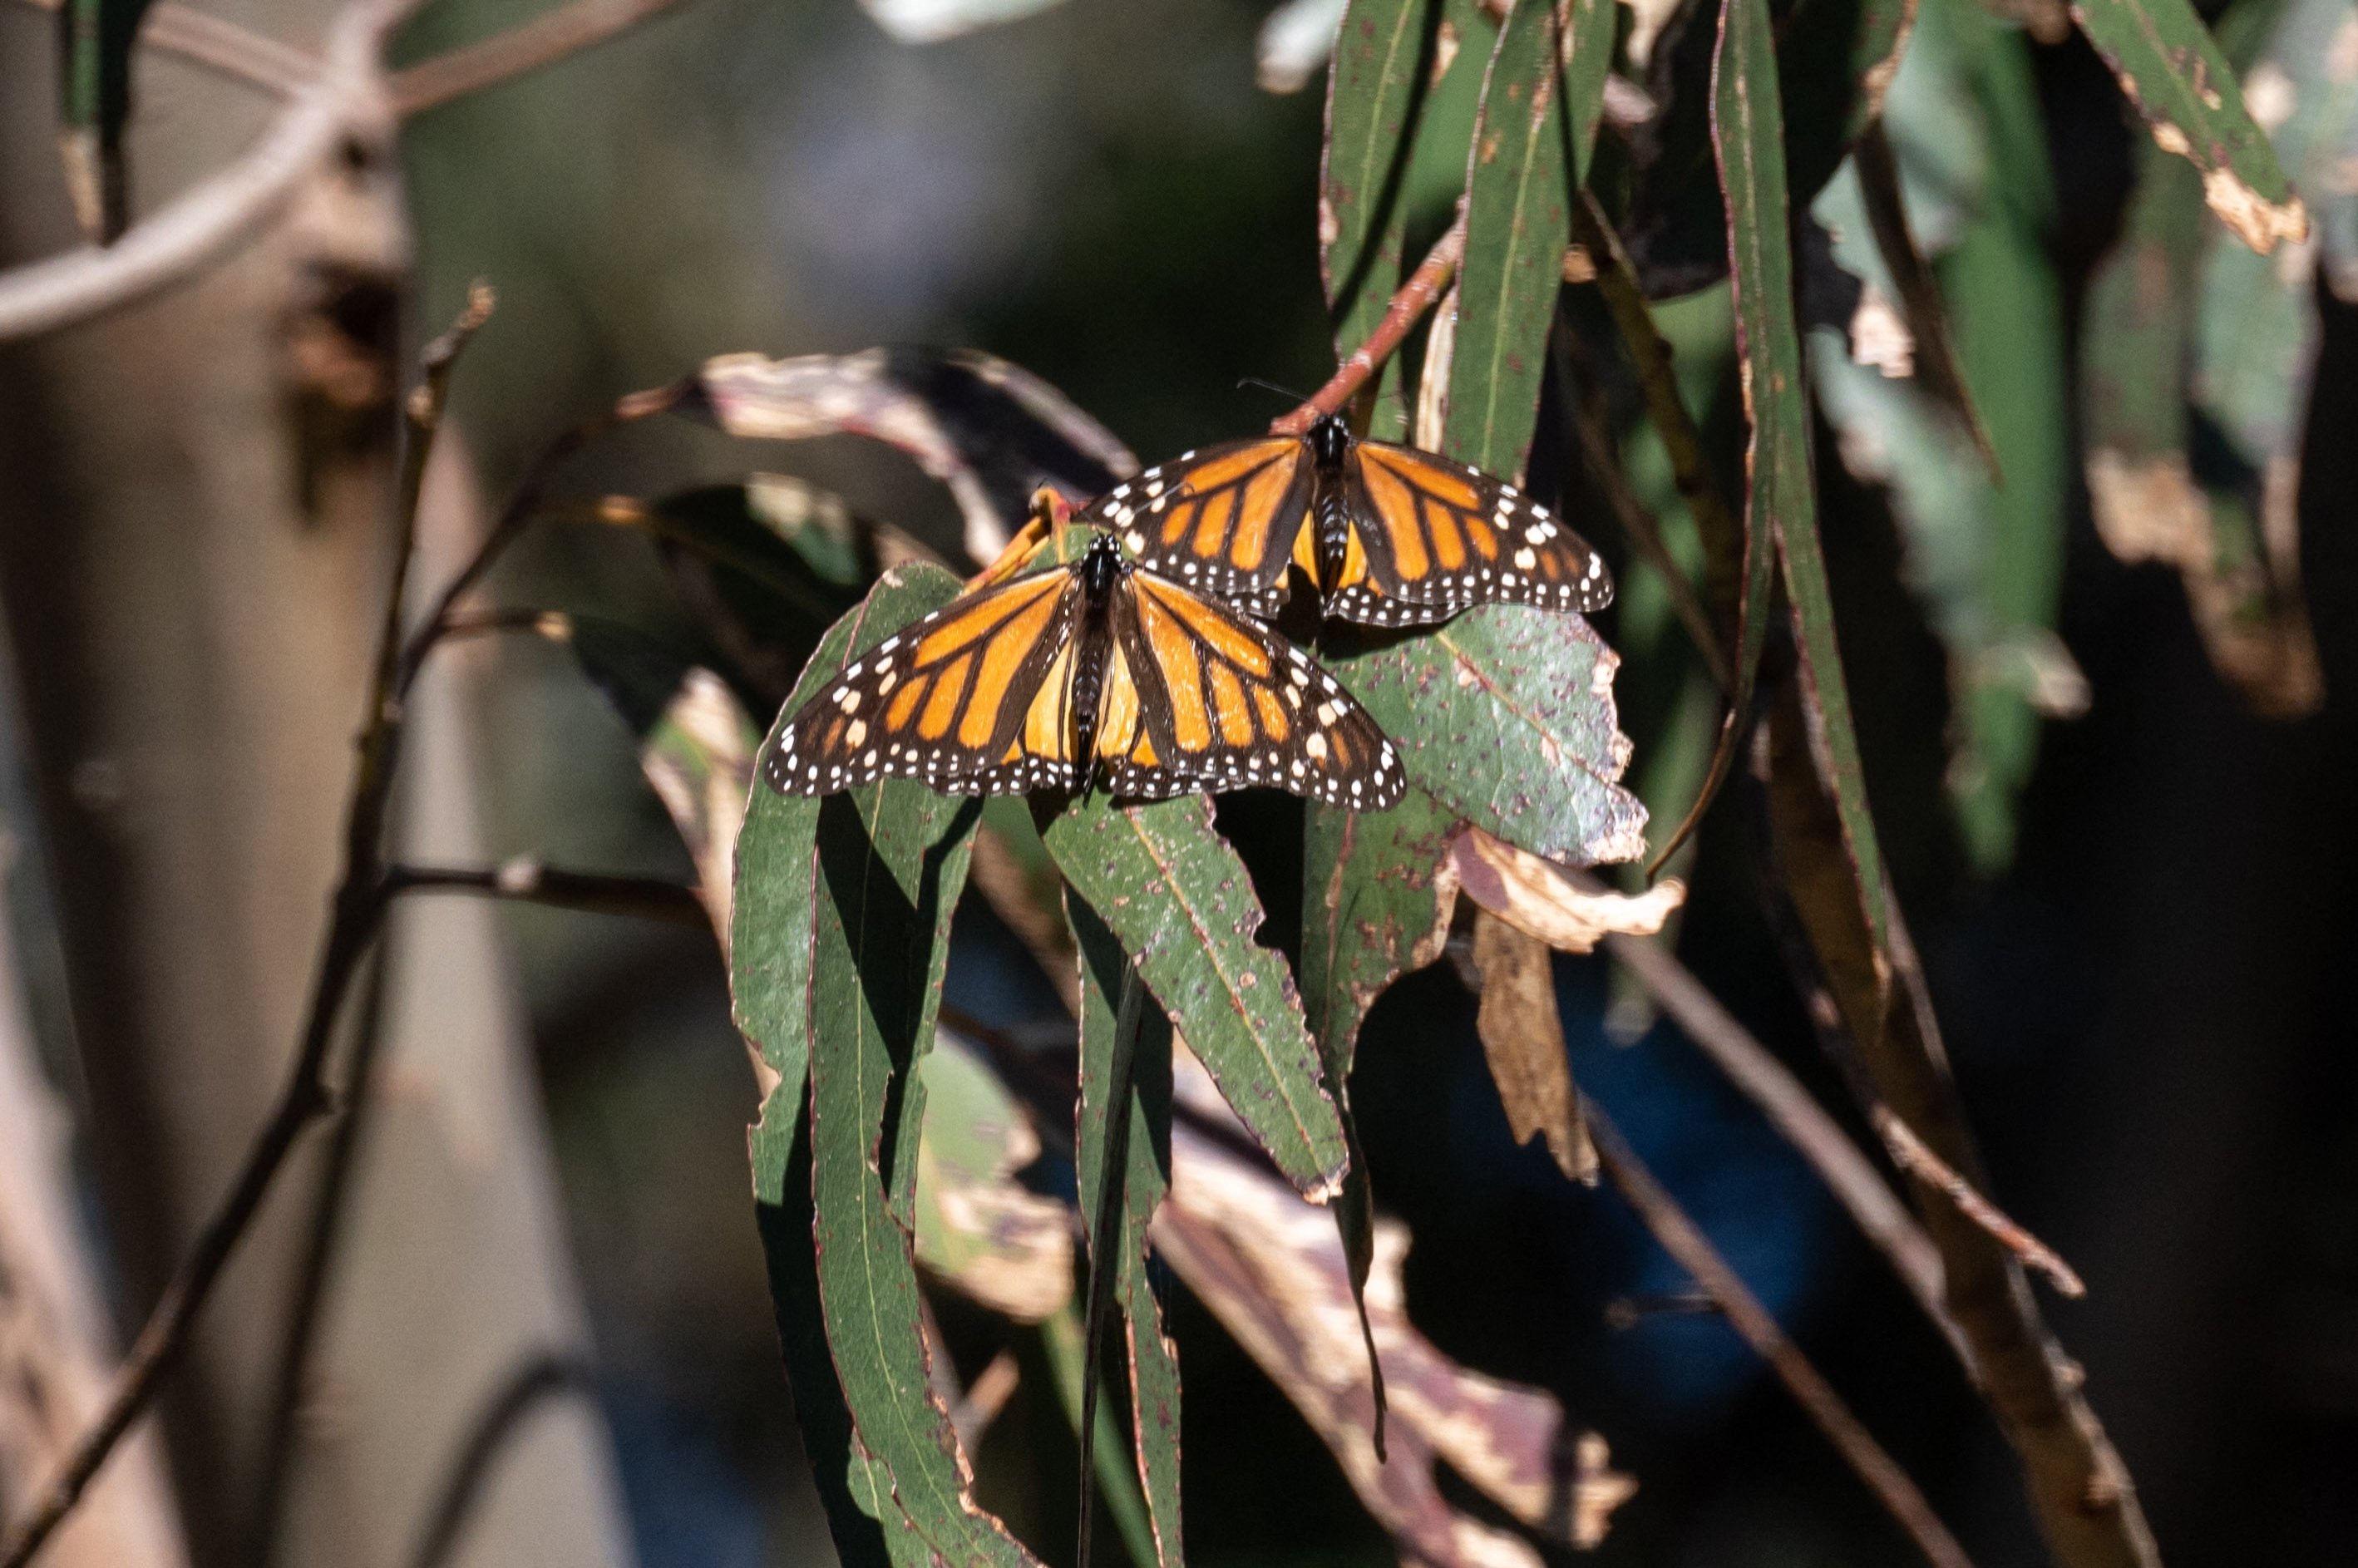 Monarch butterflies are seen as they overwinter in a protected area inside Natural Bridges State Beach in Santa Cruz, California, U.S., Jan. 26, 2023. (AFP Photo)